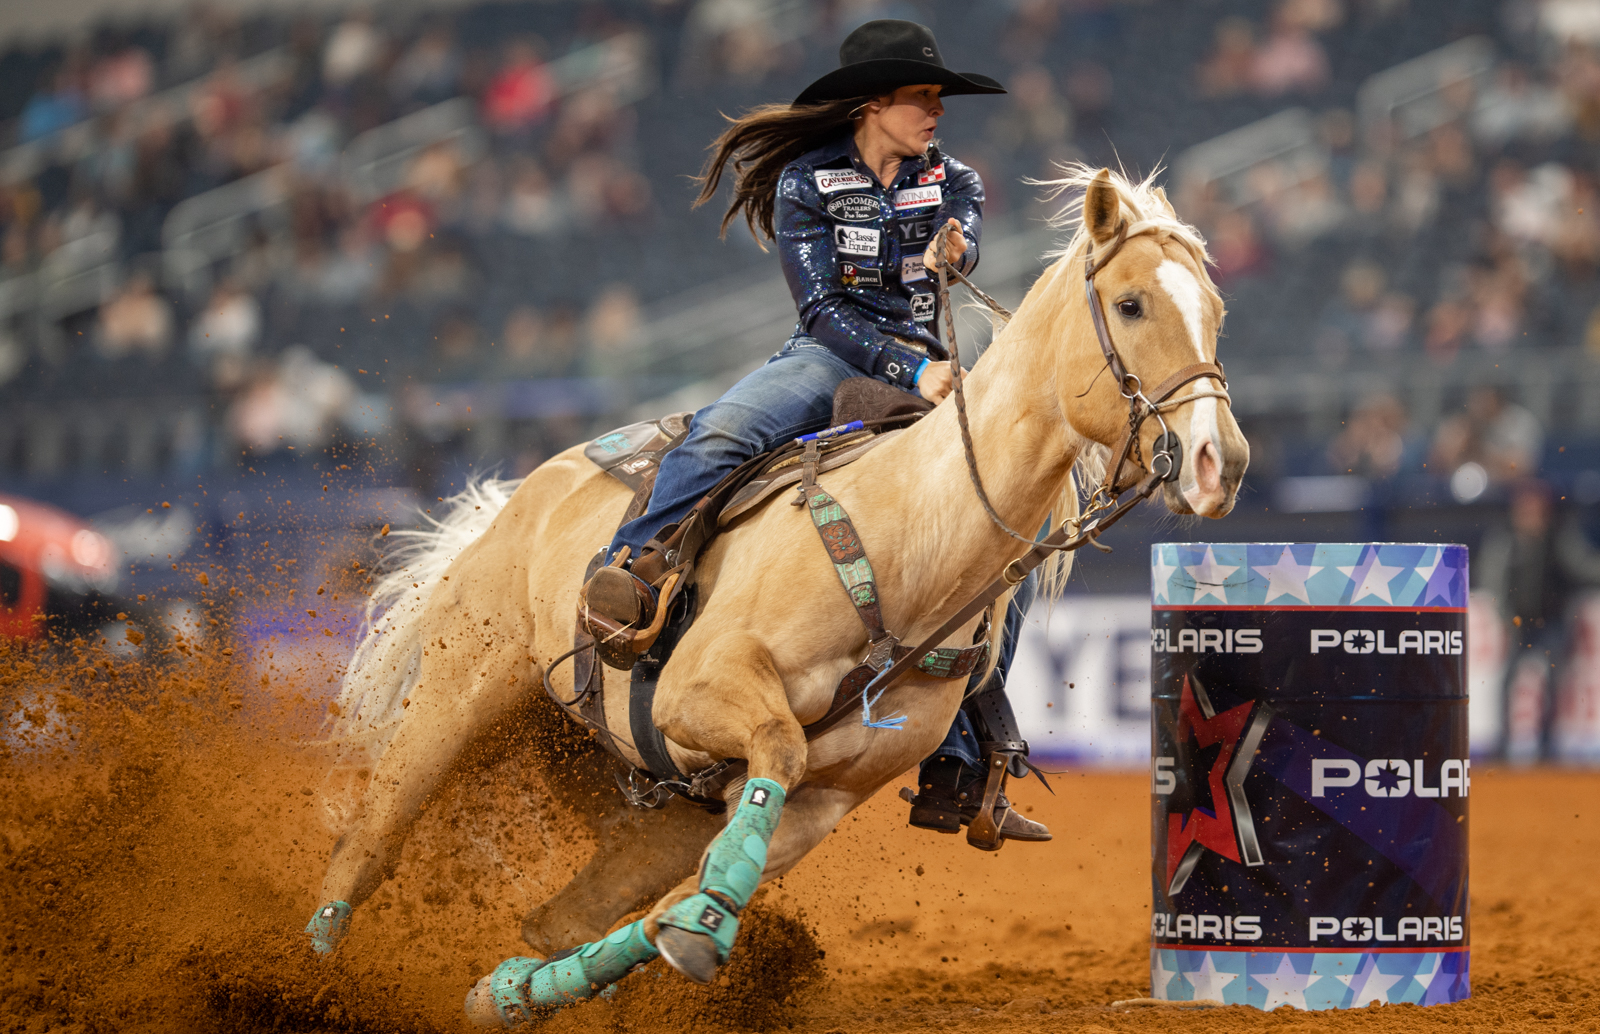 RFDTV’s The American Rodeo crowned its 2021 champions 440 Post